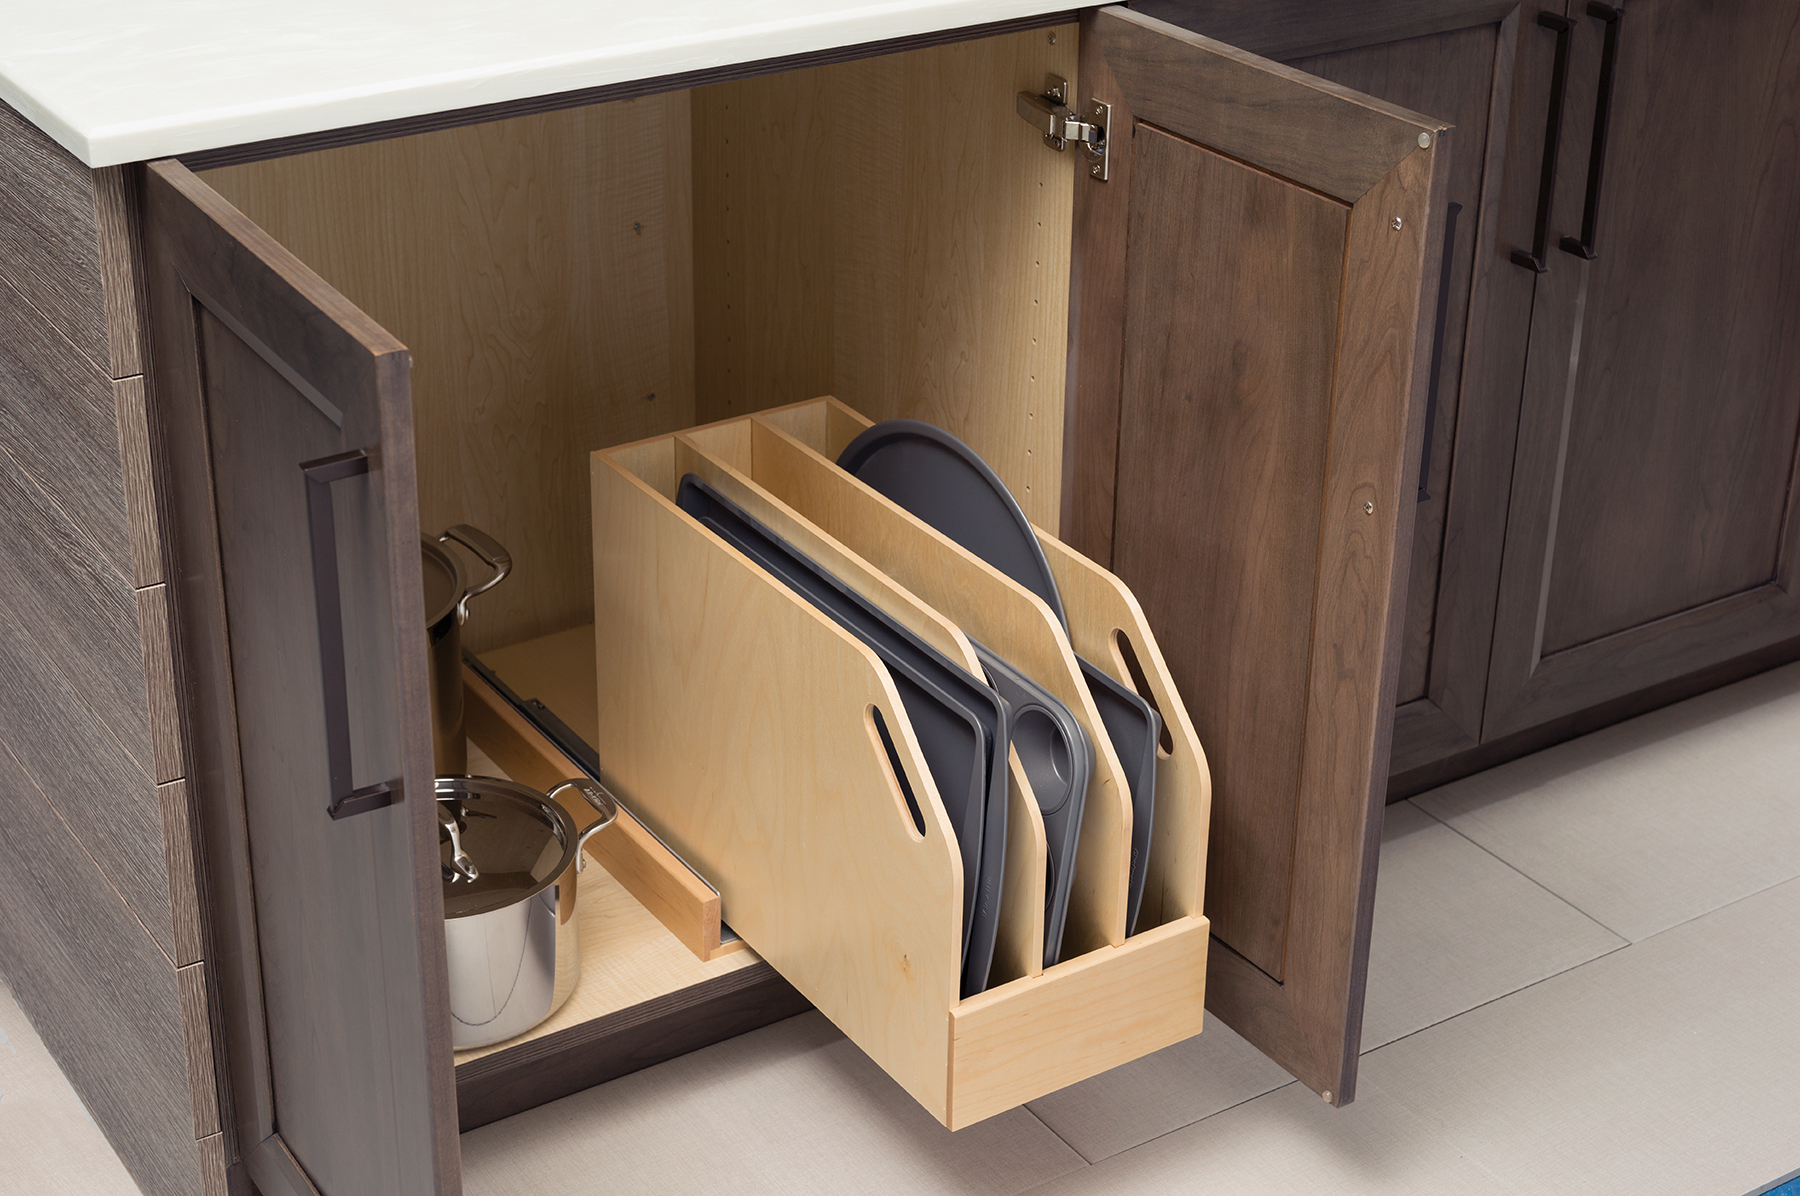 Tray Divider Pull-Out - Dura Supreme Cabinetry